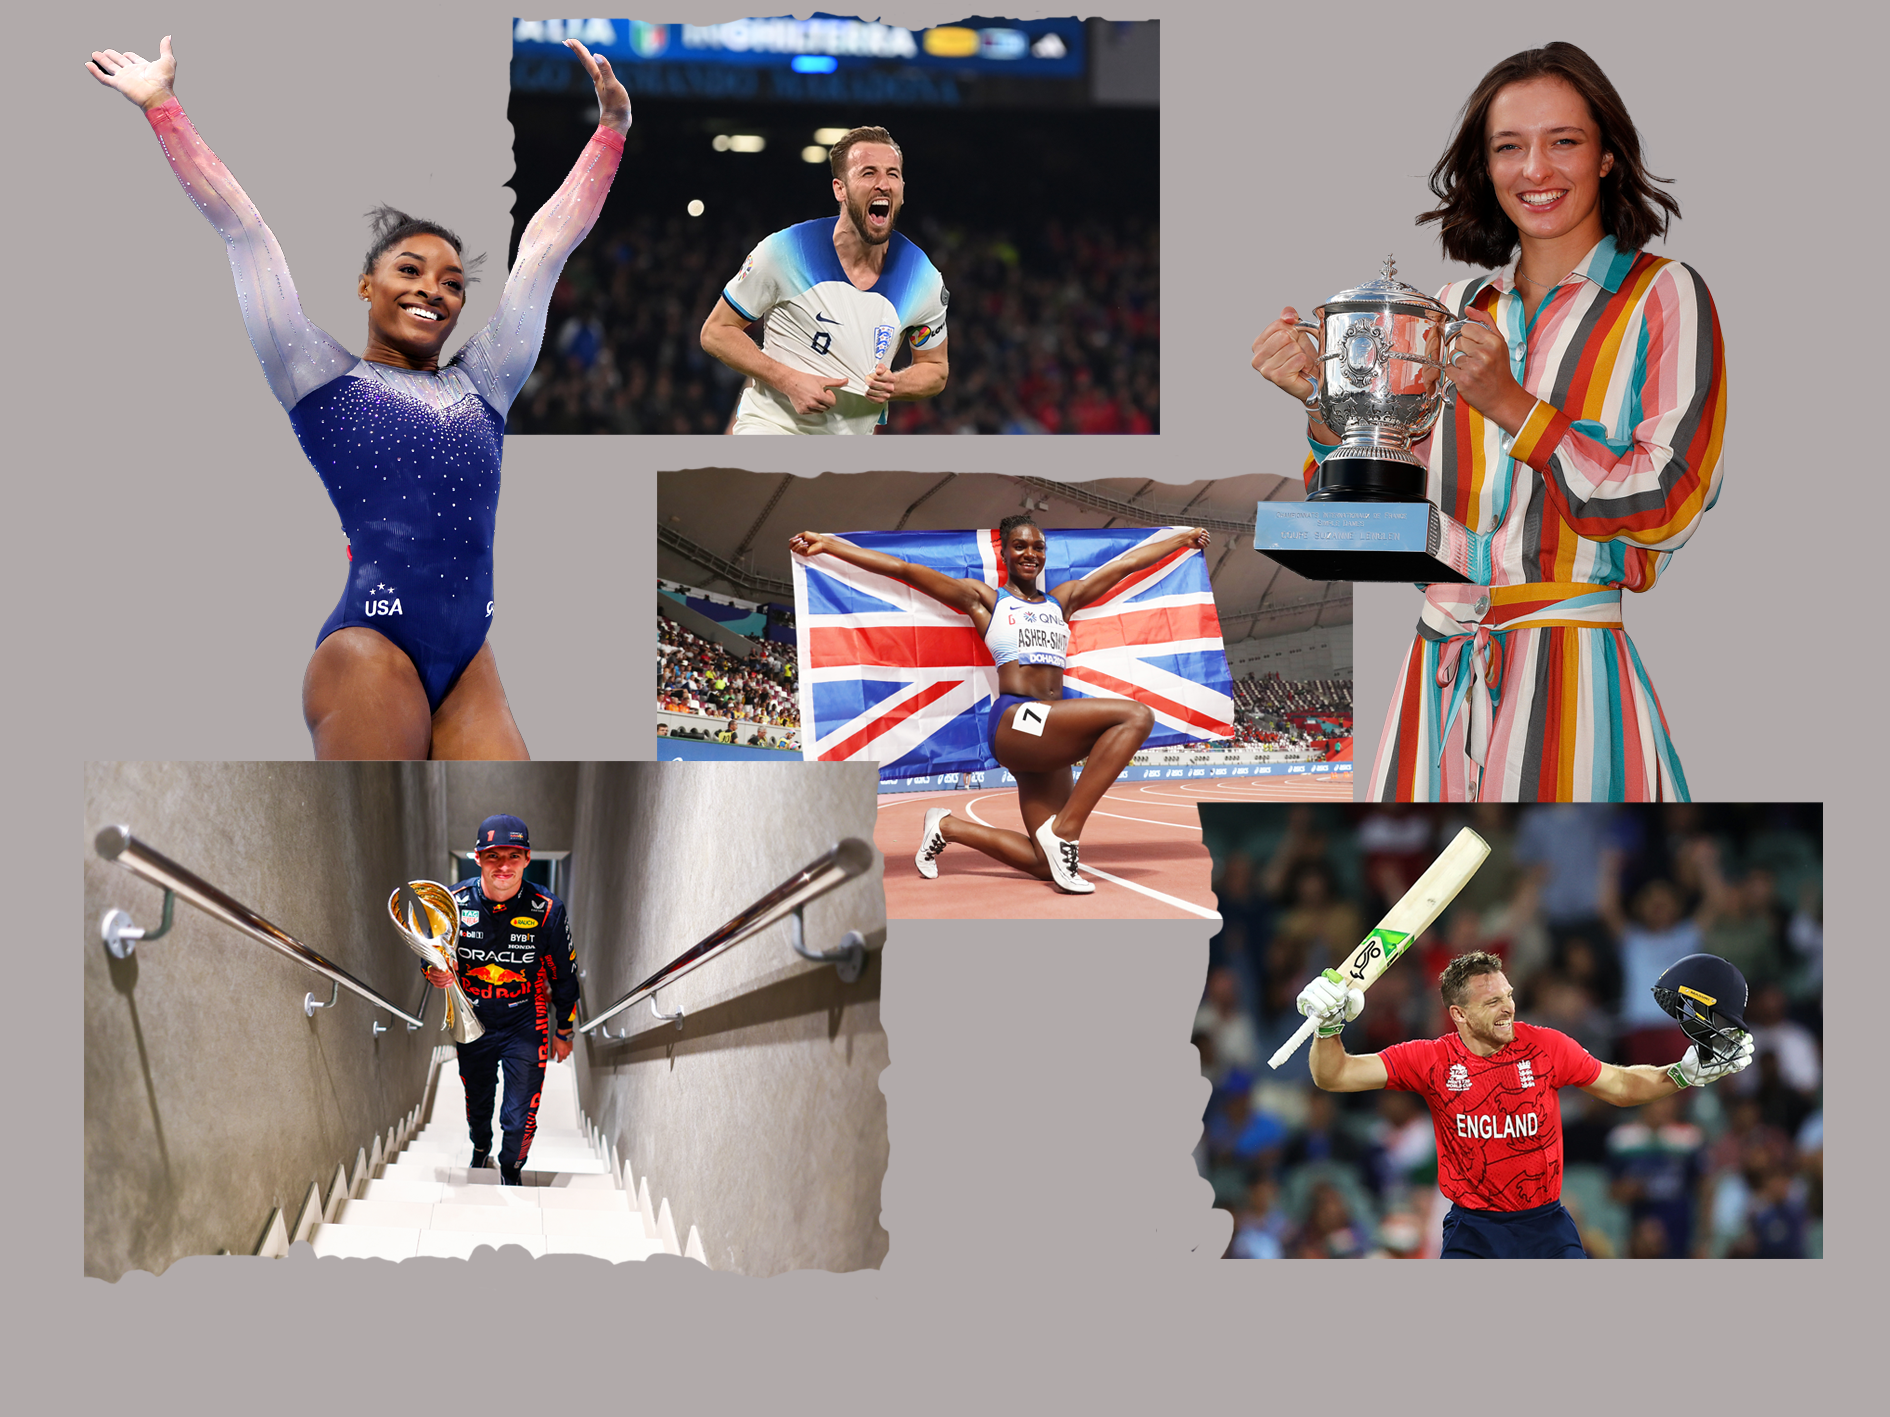 A big year ahead for (clockwise from top left) Simone Biles, Harry Kane, Dina Asher-Smith, Iga Swiatek, Jos Buttler and Max Verstappen